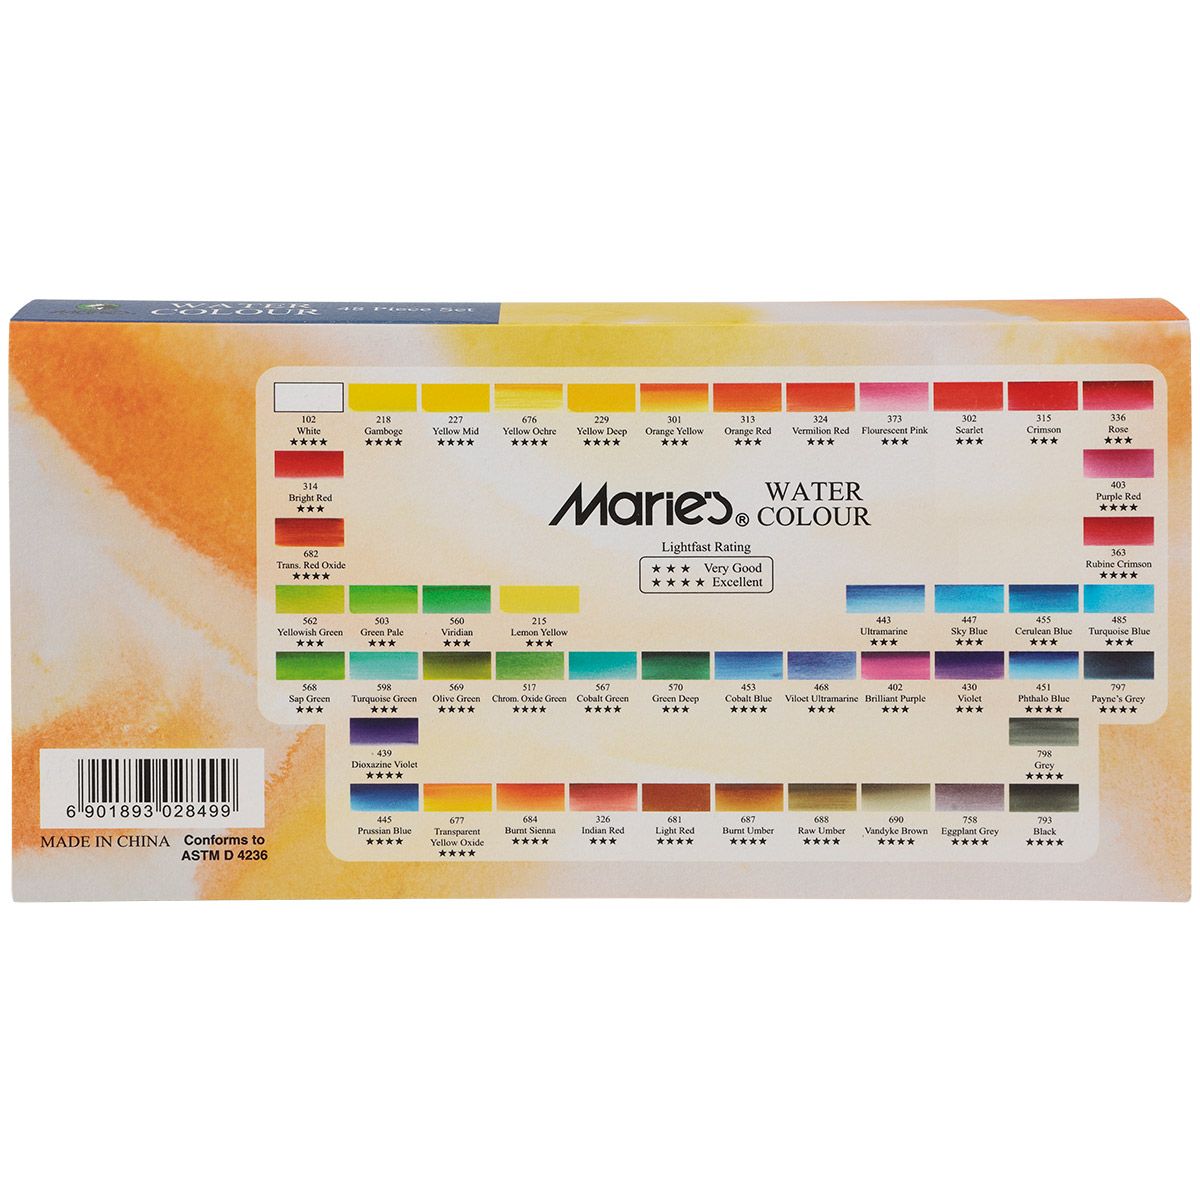 Highly pigmented lightfast and permanent watercolors